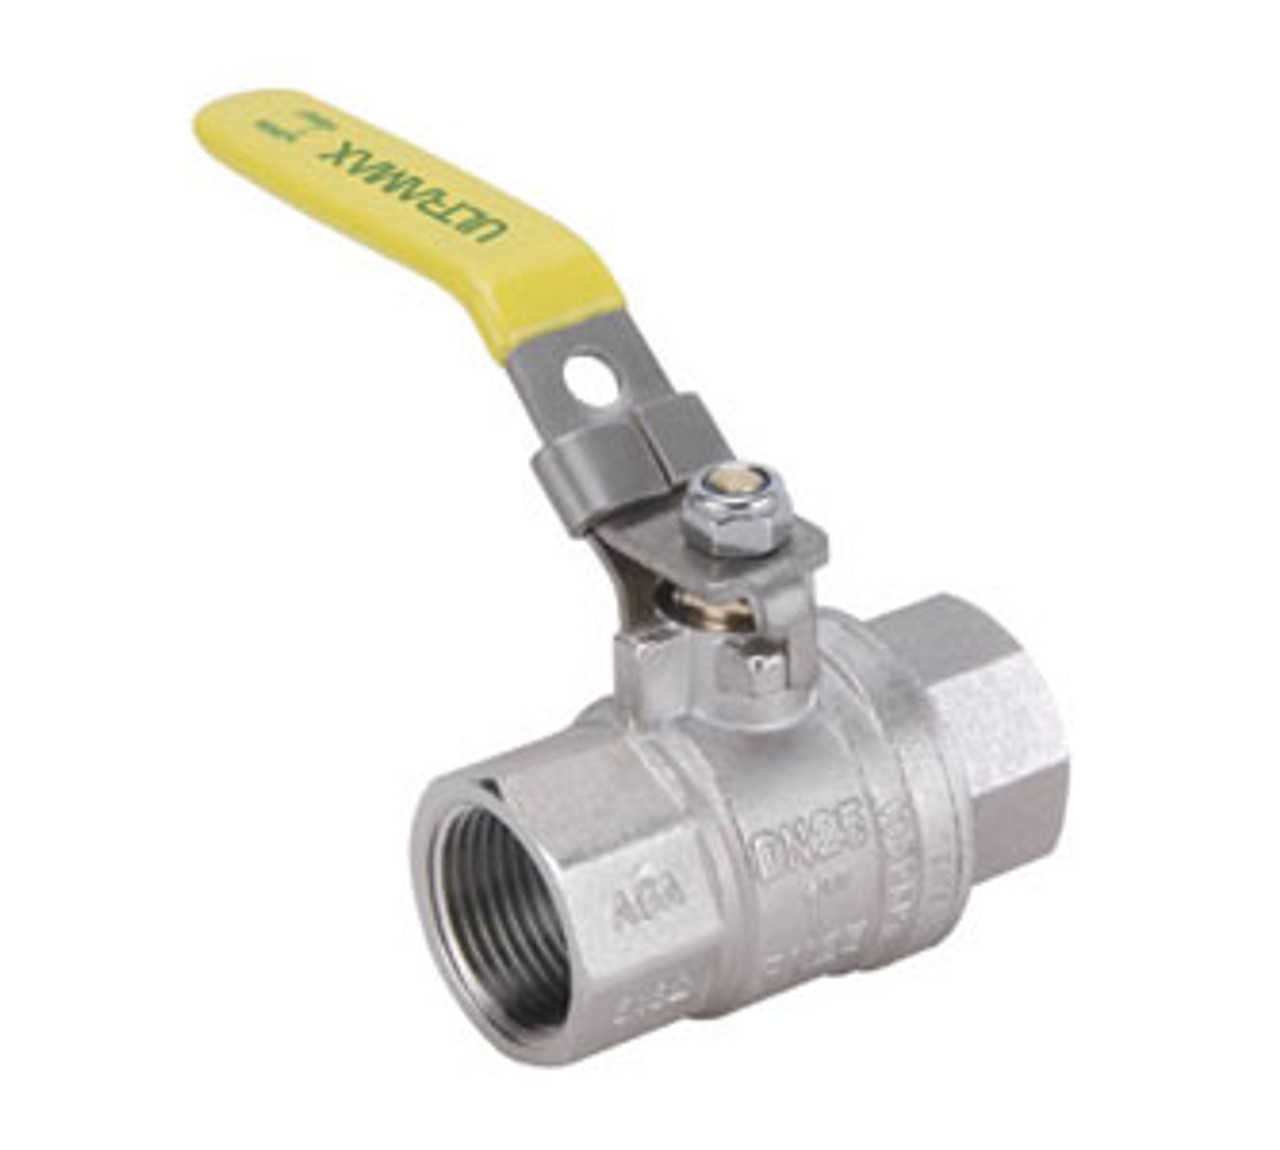 Ball Valves AGA Approved F x F (lockable handle) - 1/2"